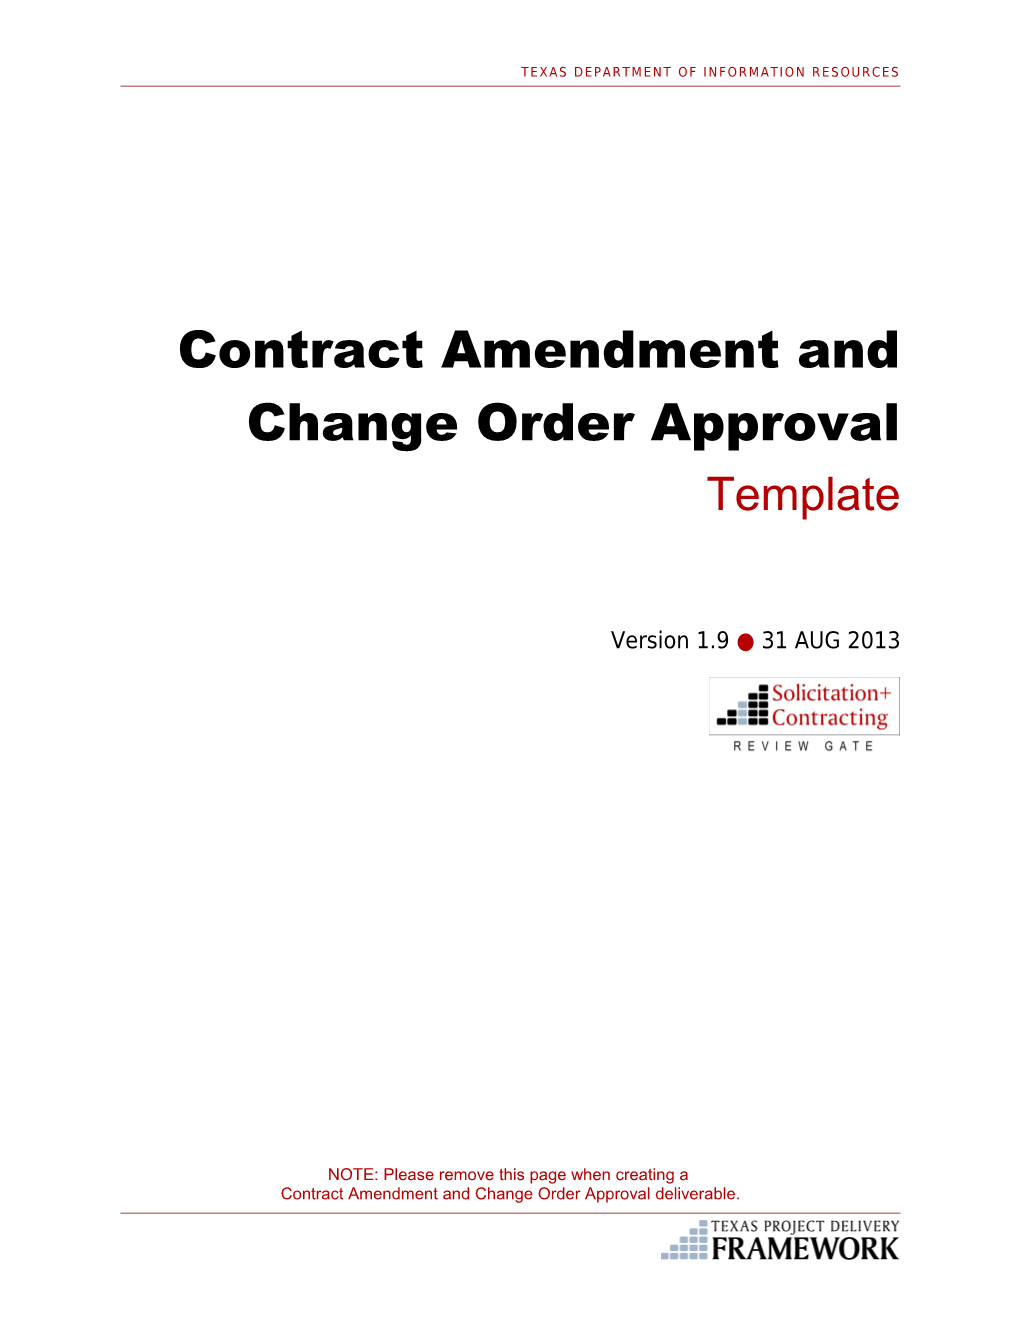 Contract Amendment and Change Order Approval Template